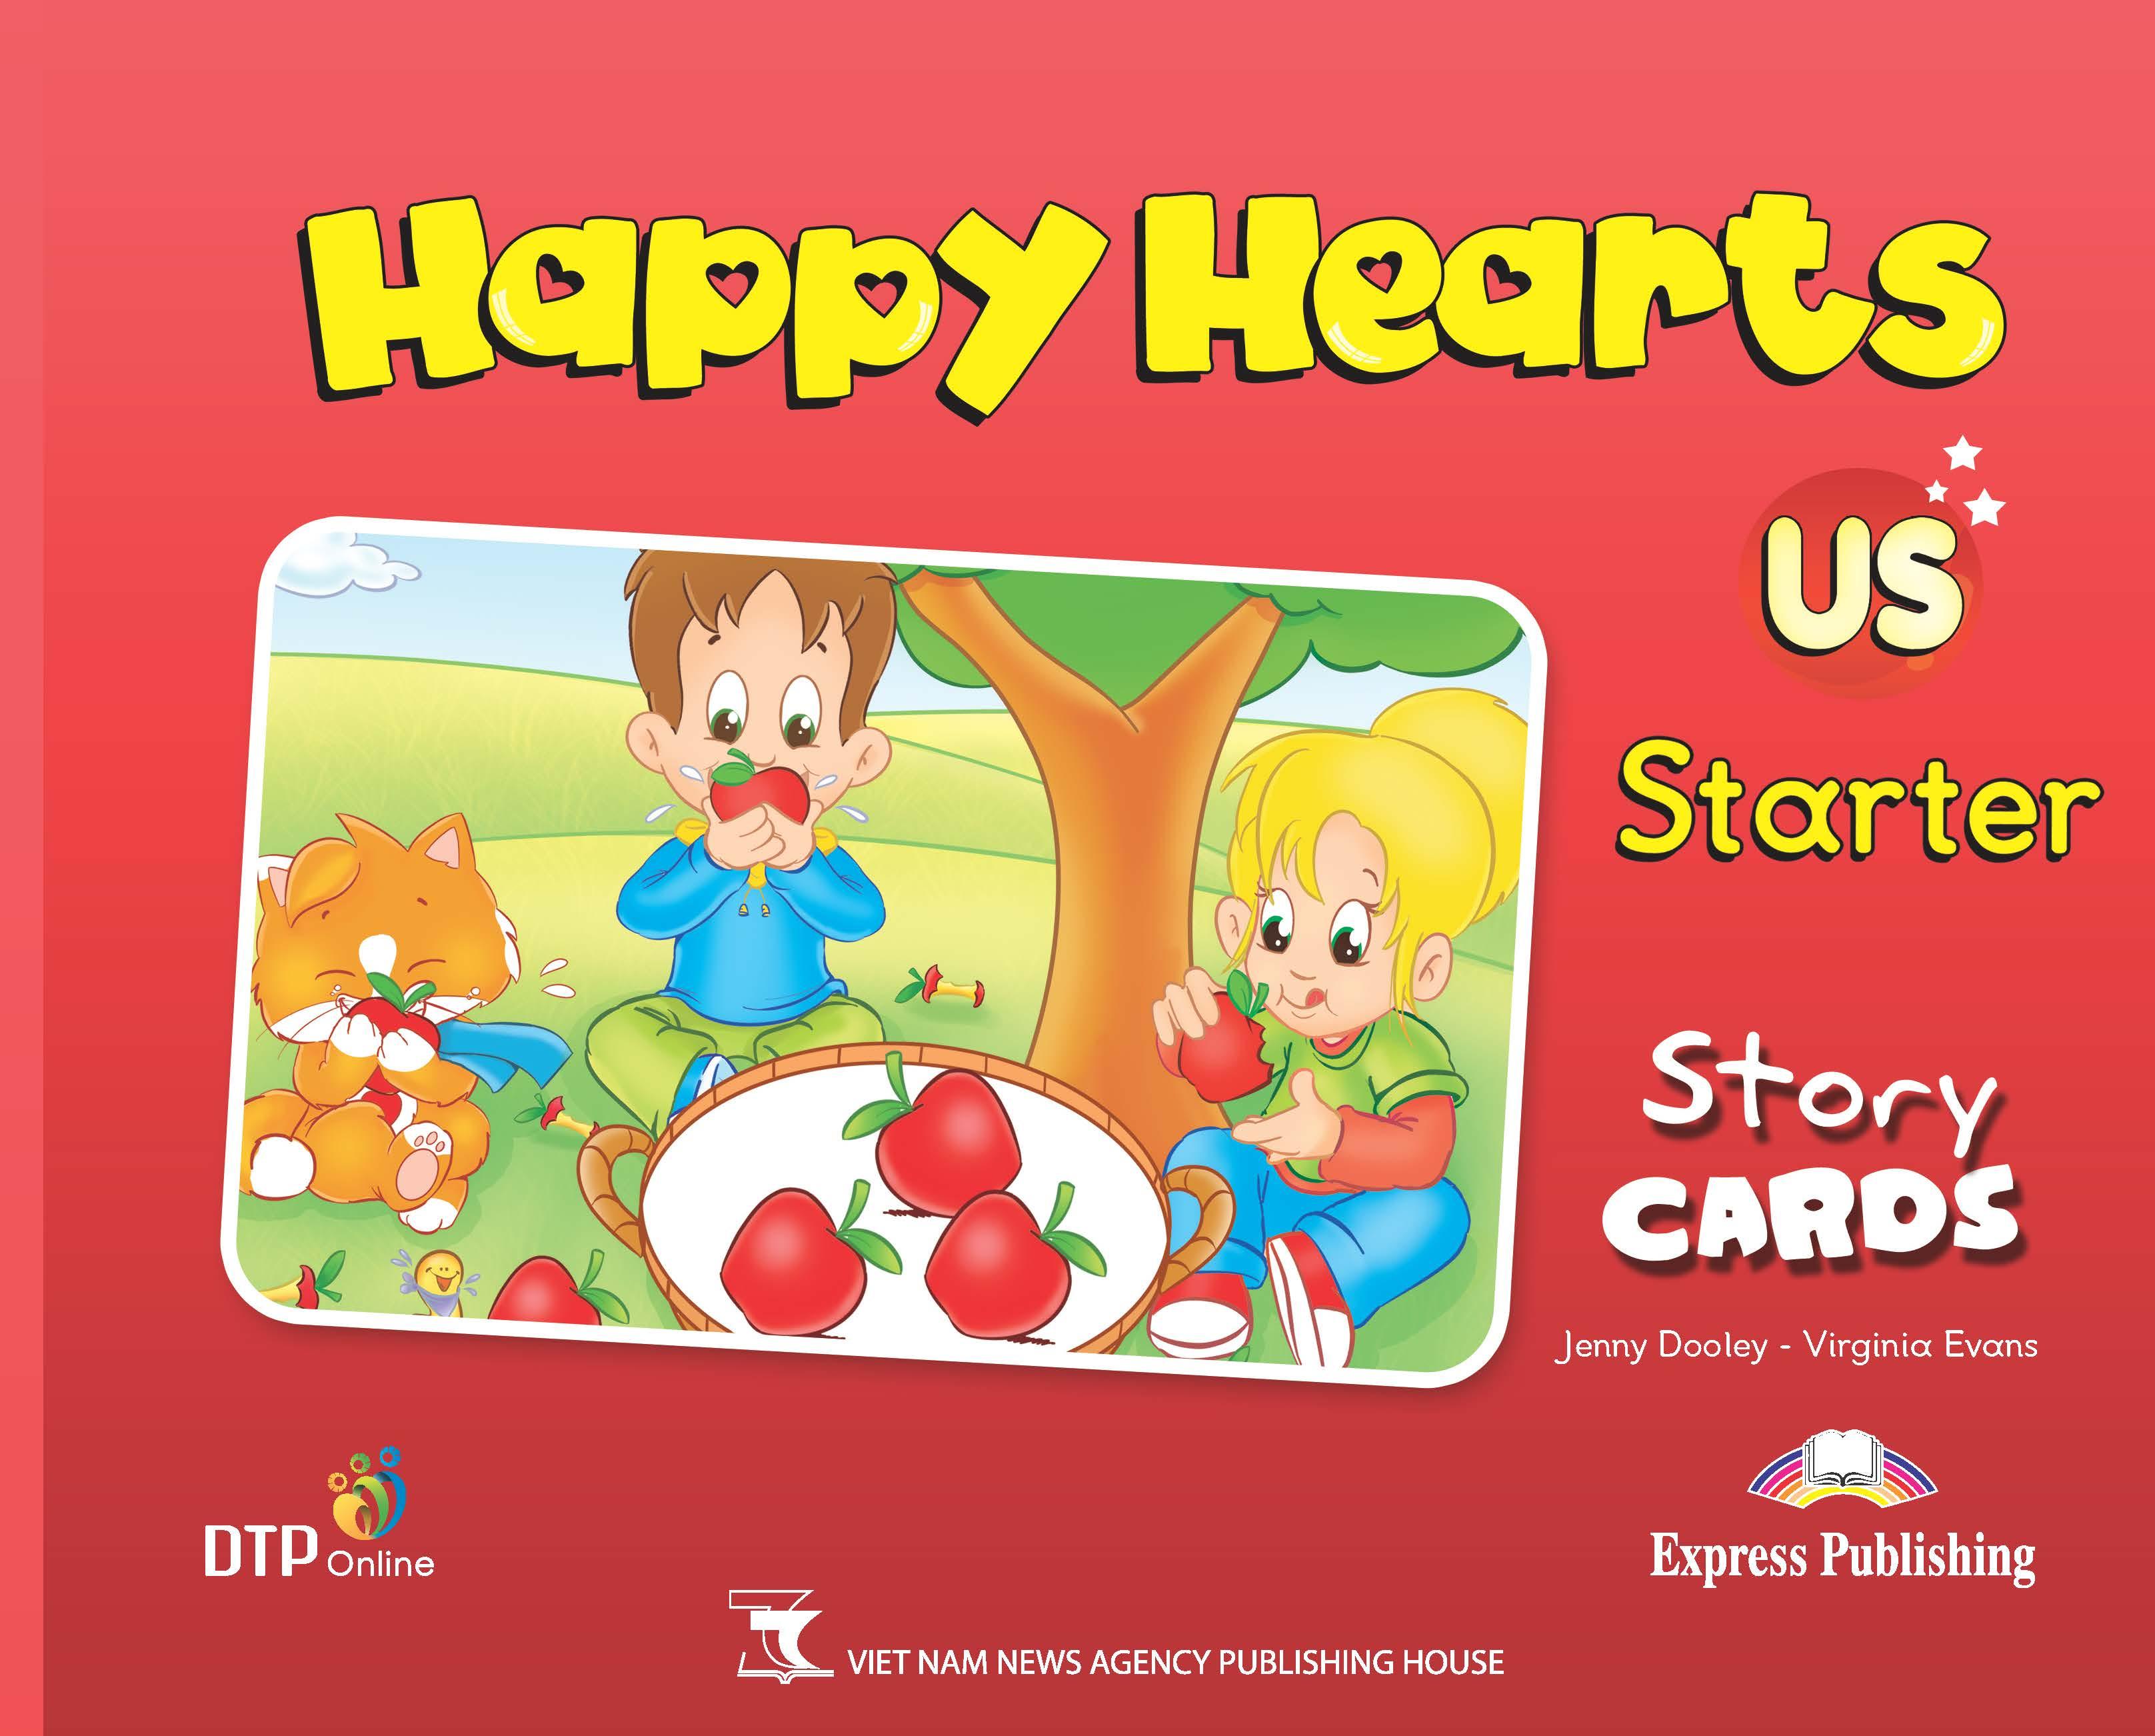 Happy Hearts US Starter Story Cards